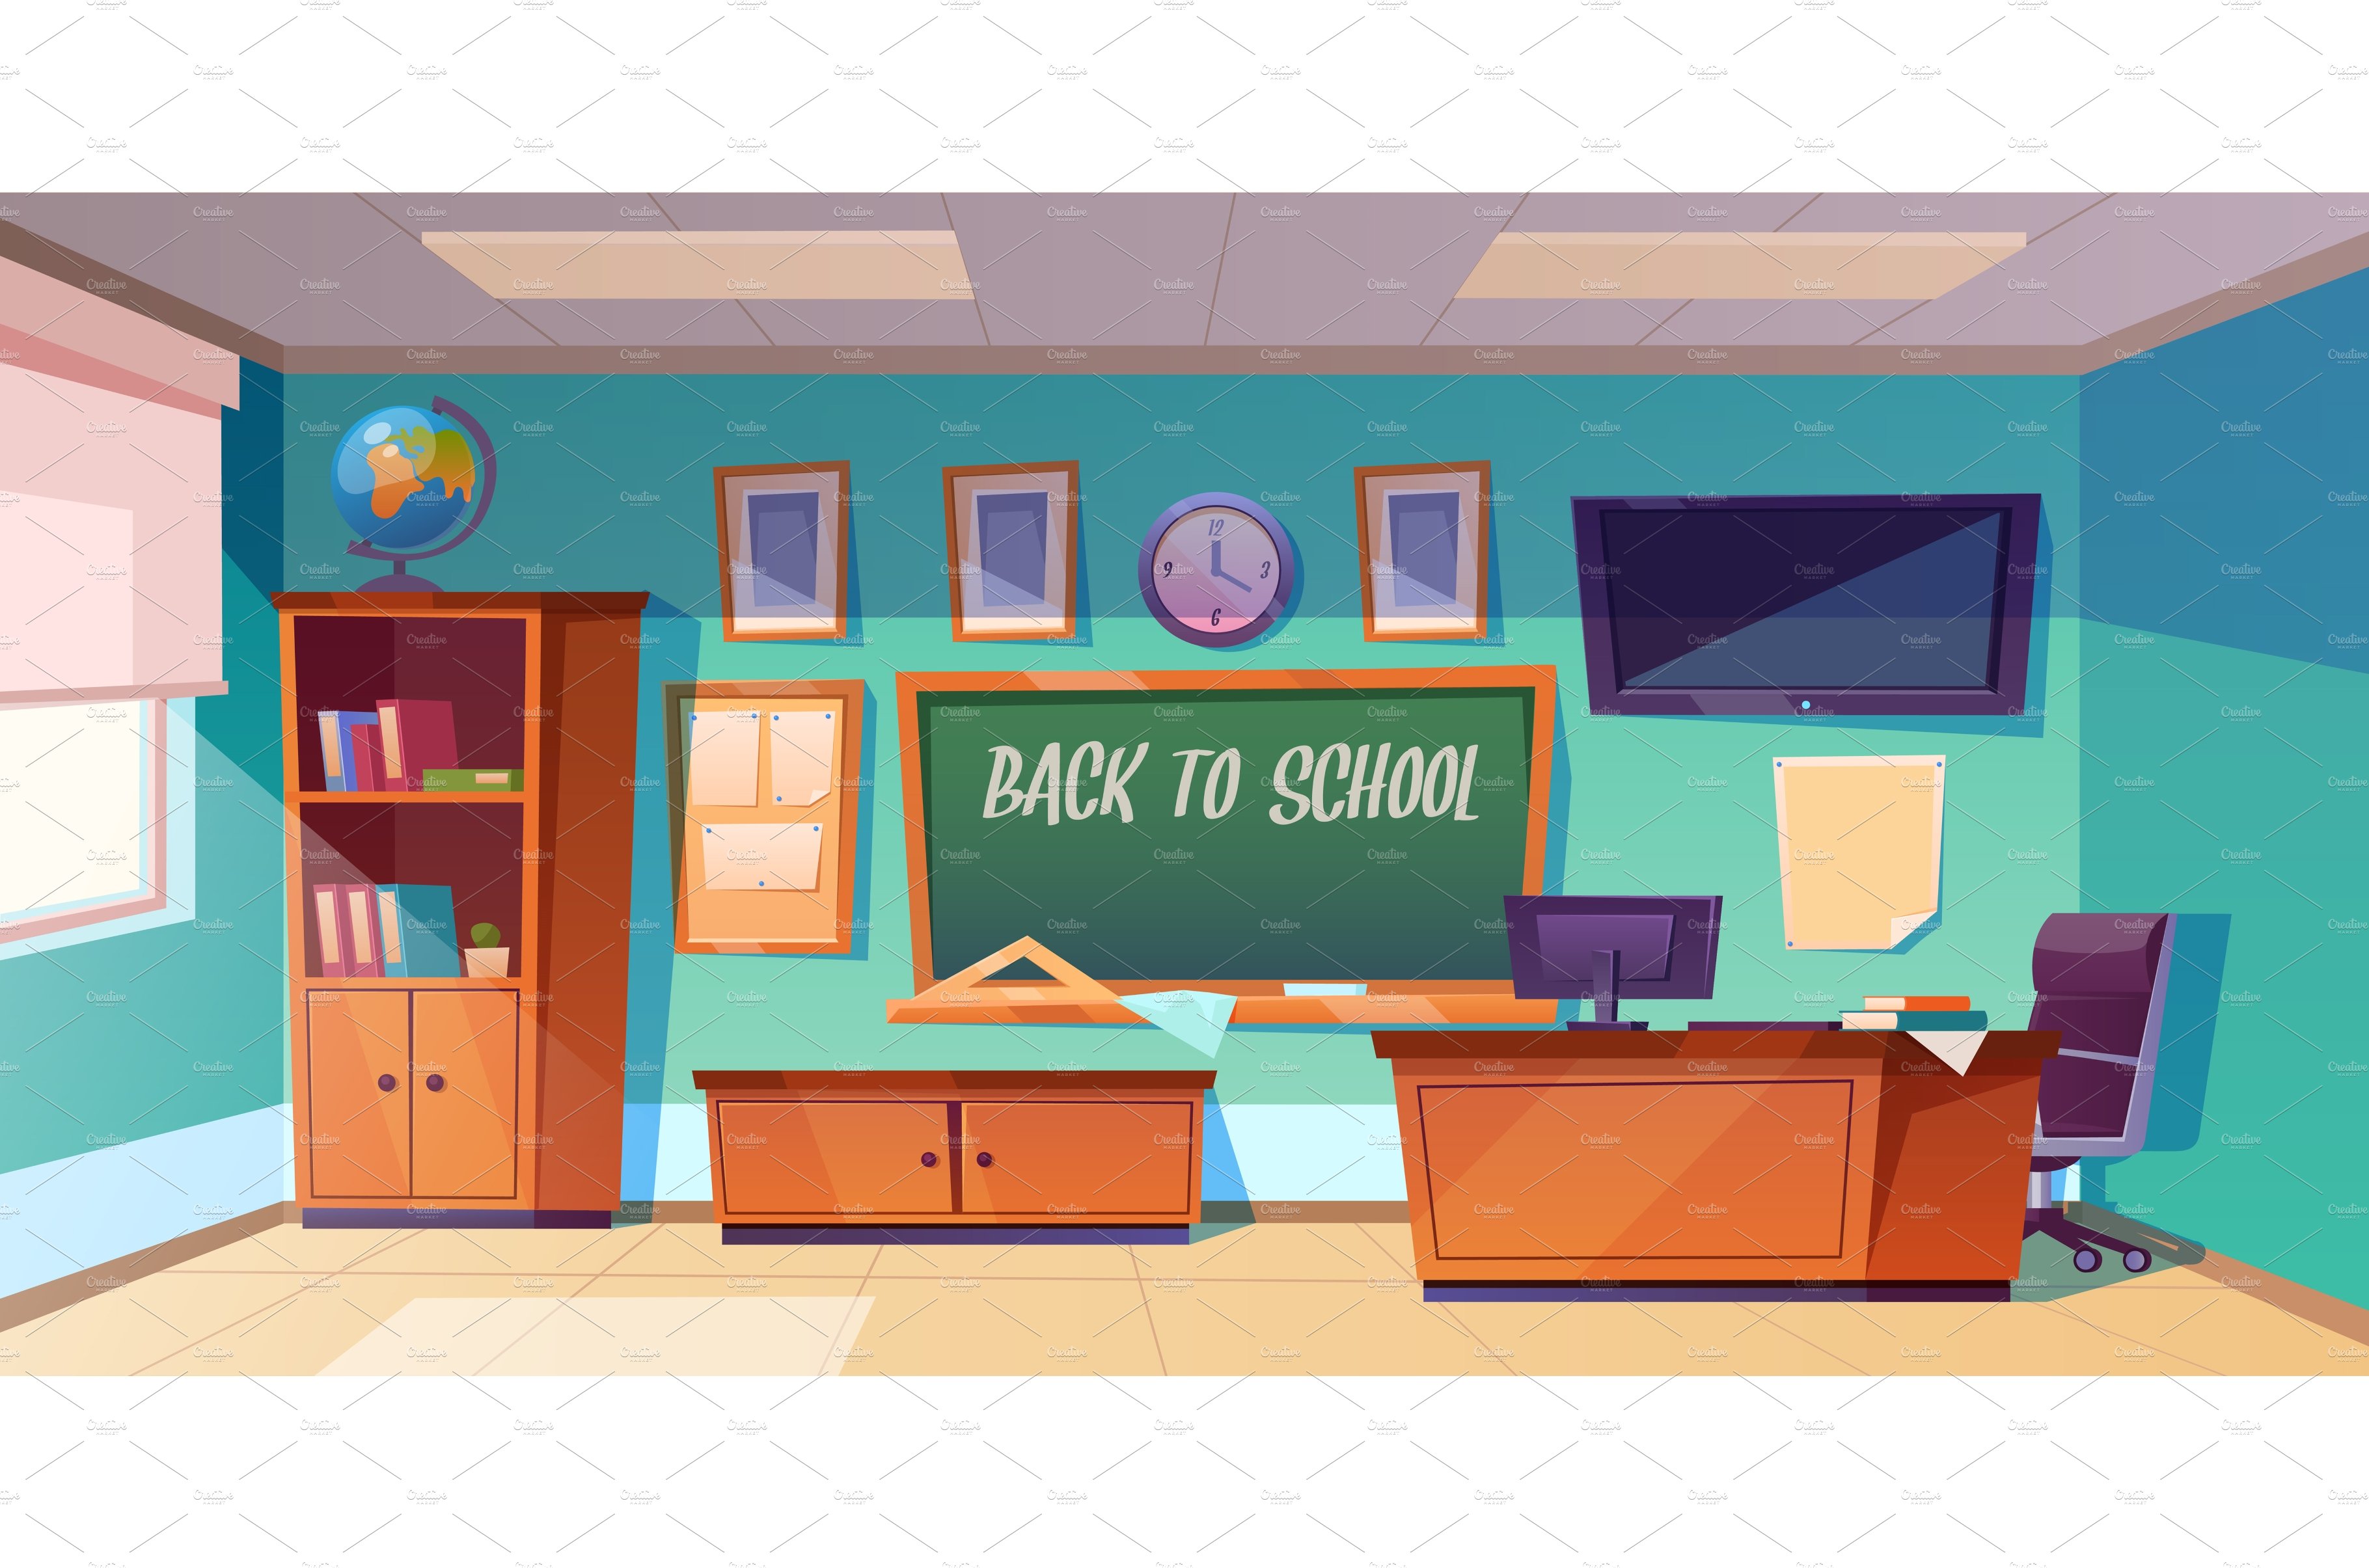 Back to school poster with empty cover image.